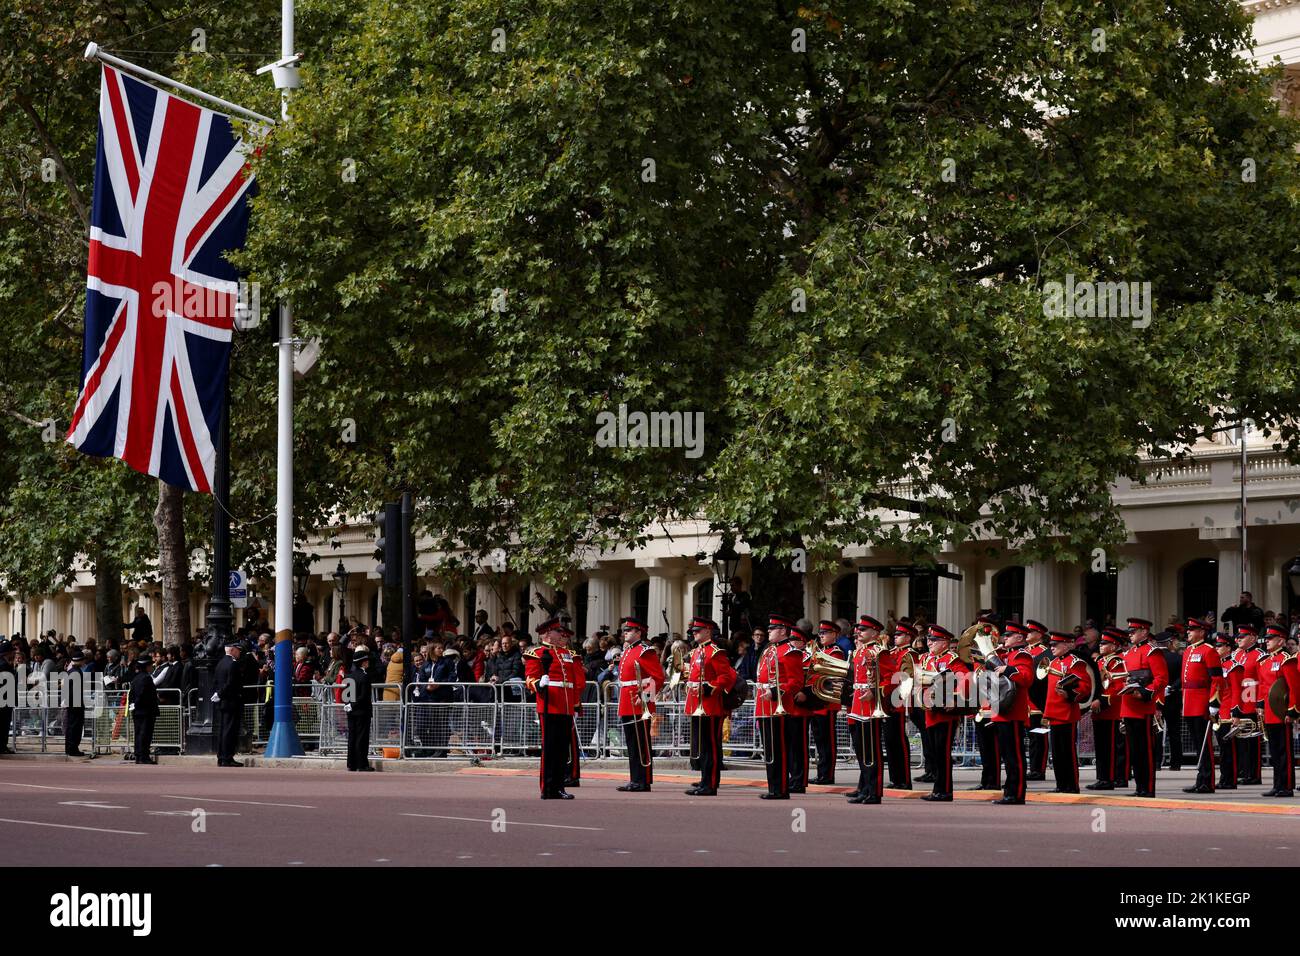 Royal guards line up on the day of the state funeral and burial of Britain's Queen Elizabeth, in London, Britain, September 19, 2022. REUTERS/Tom Nicholson Stock Photo